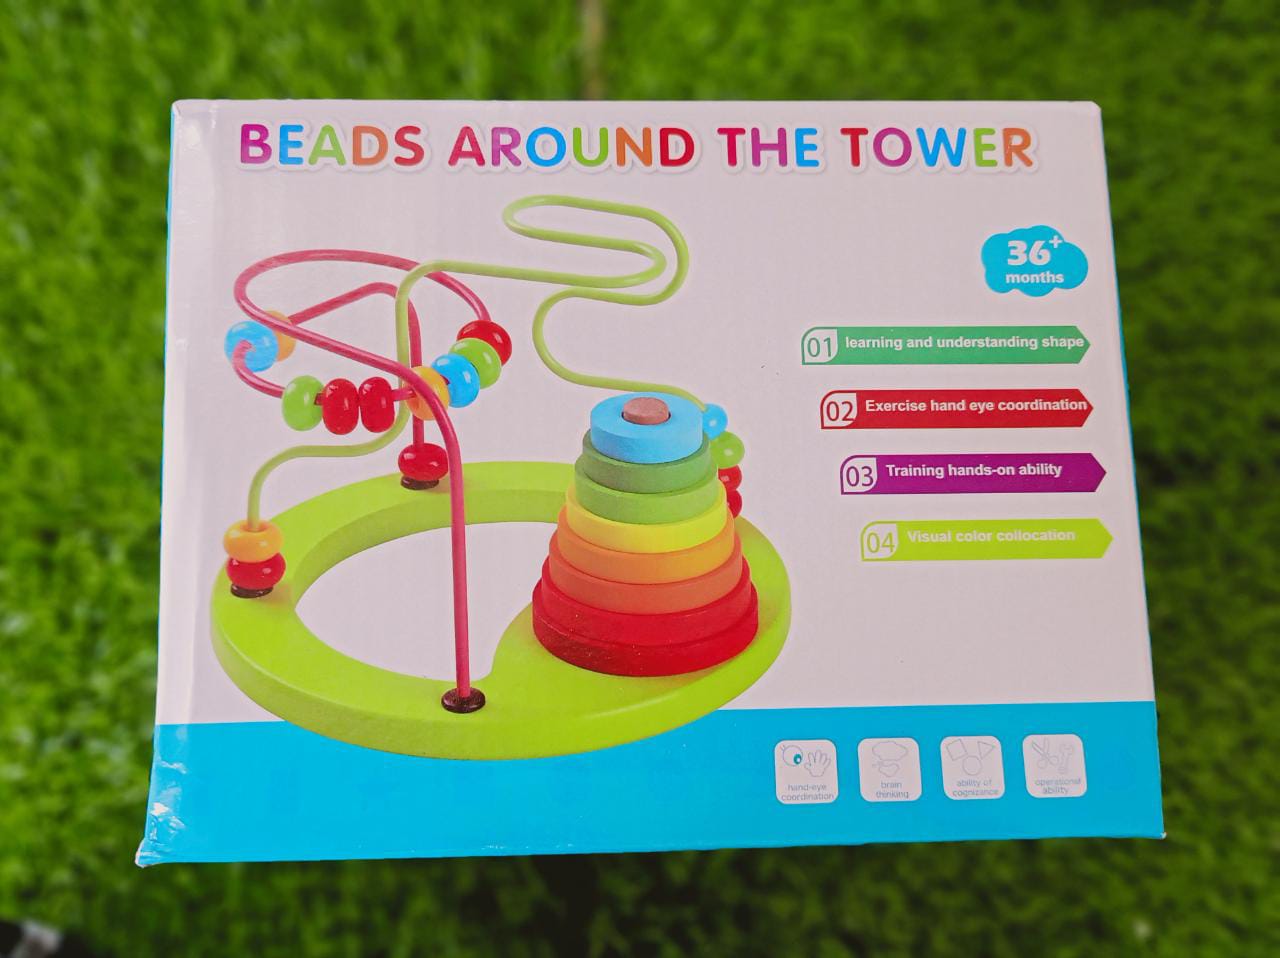 Beads Around the Tower Toys for Kids - SHTM1049